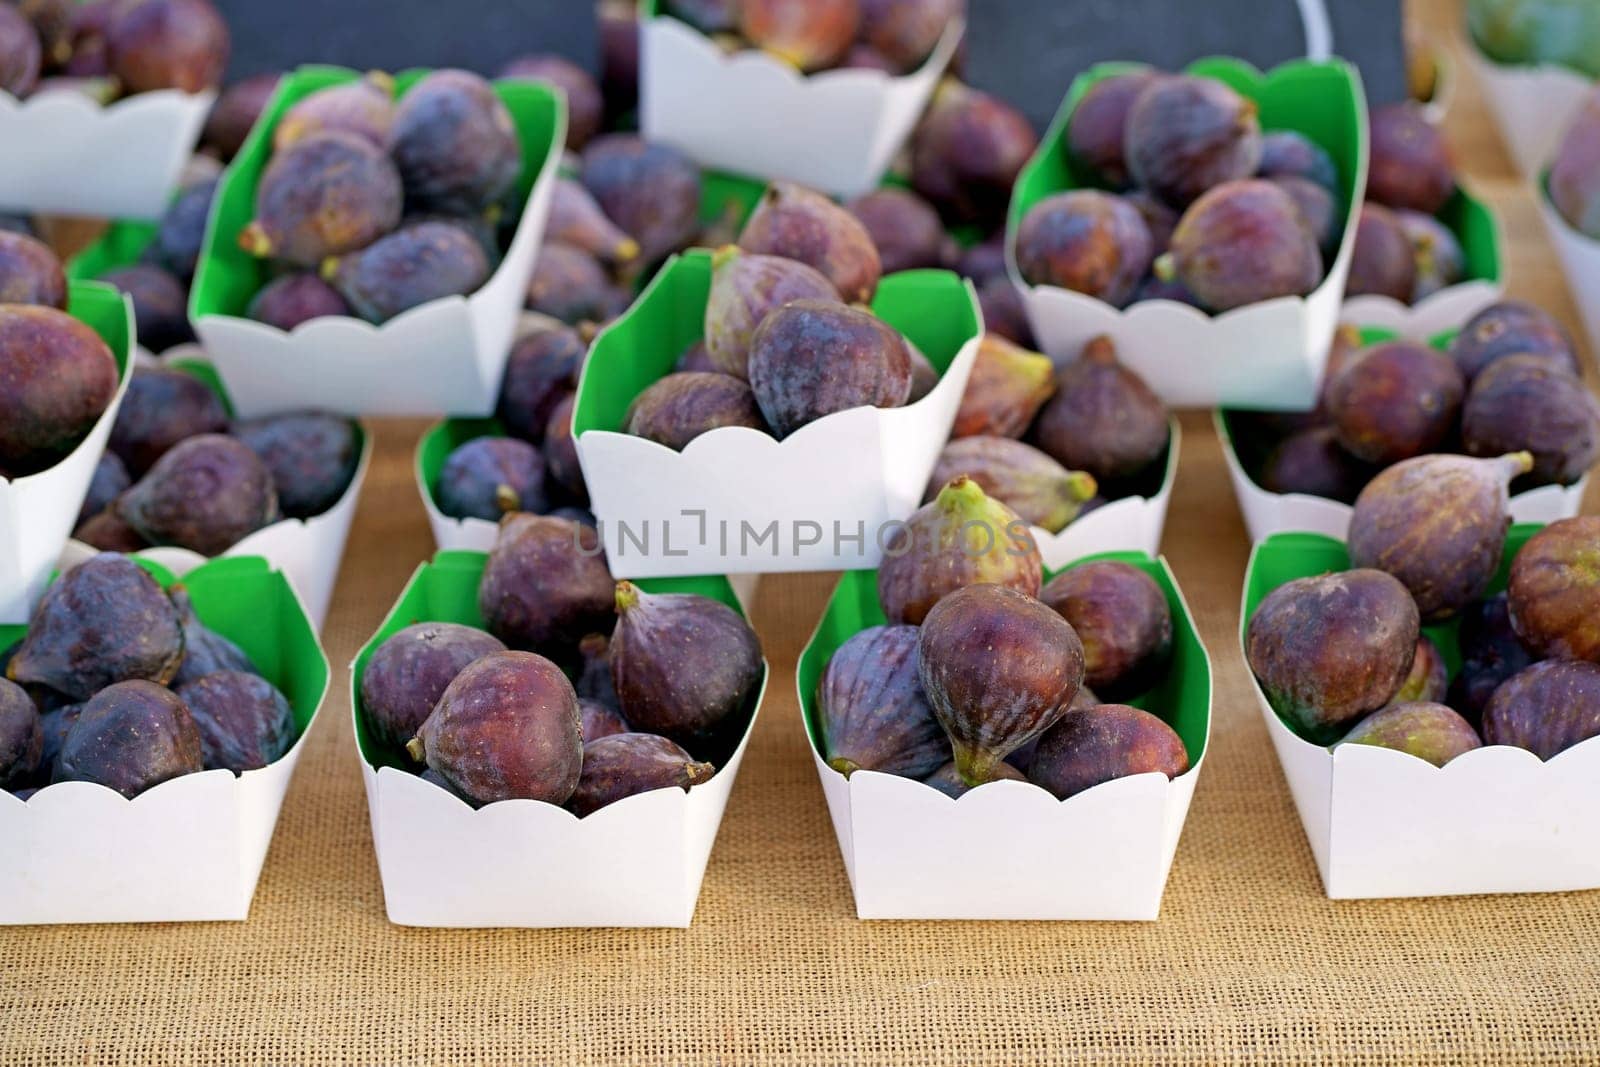 Fresh figs in a paper box. Fresh organic figs being sold on the table at a farmers market by aprilphoto